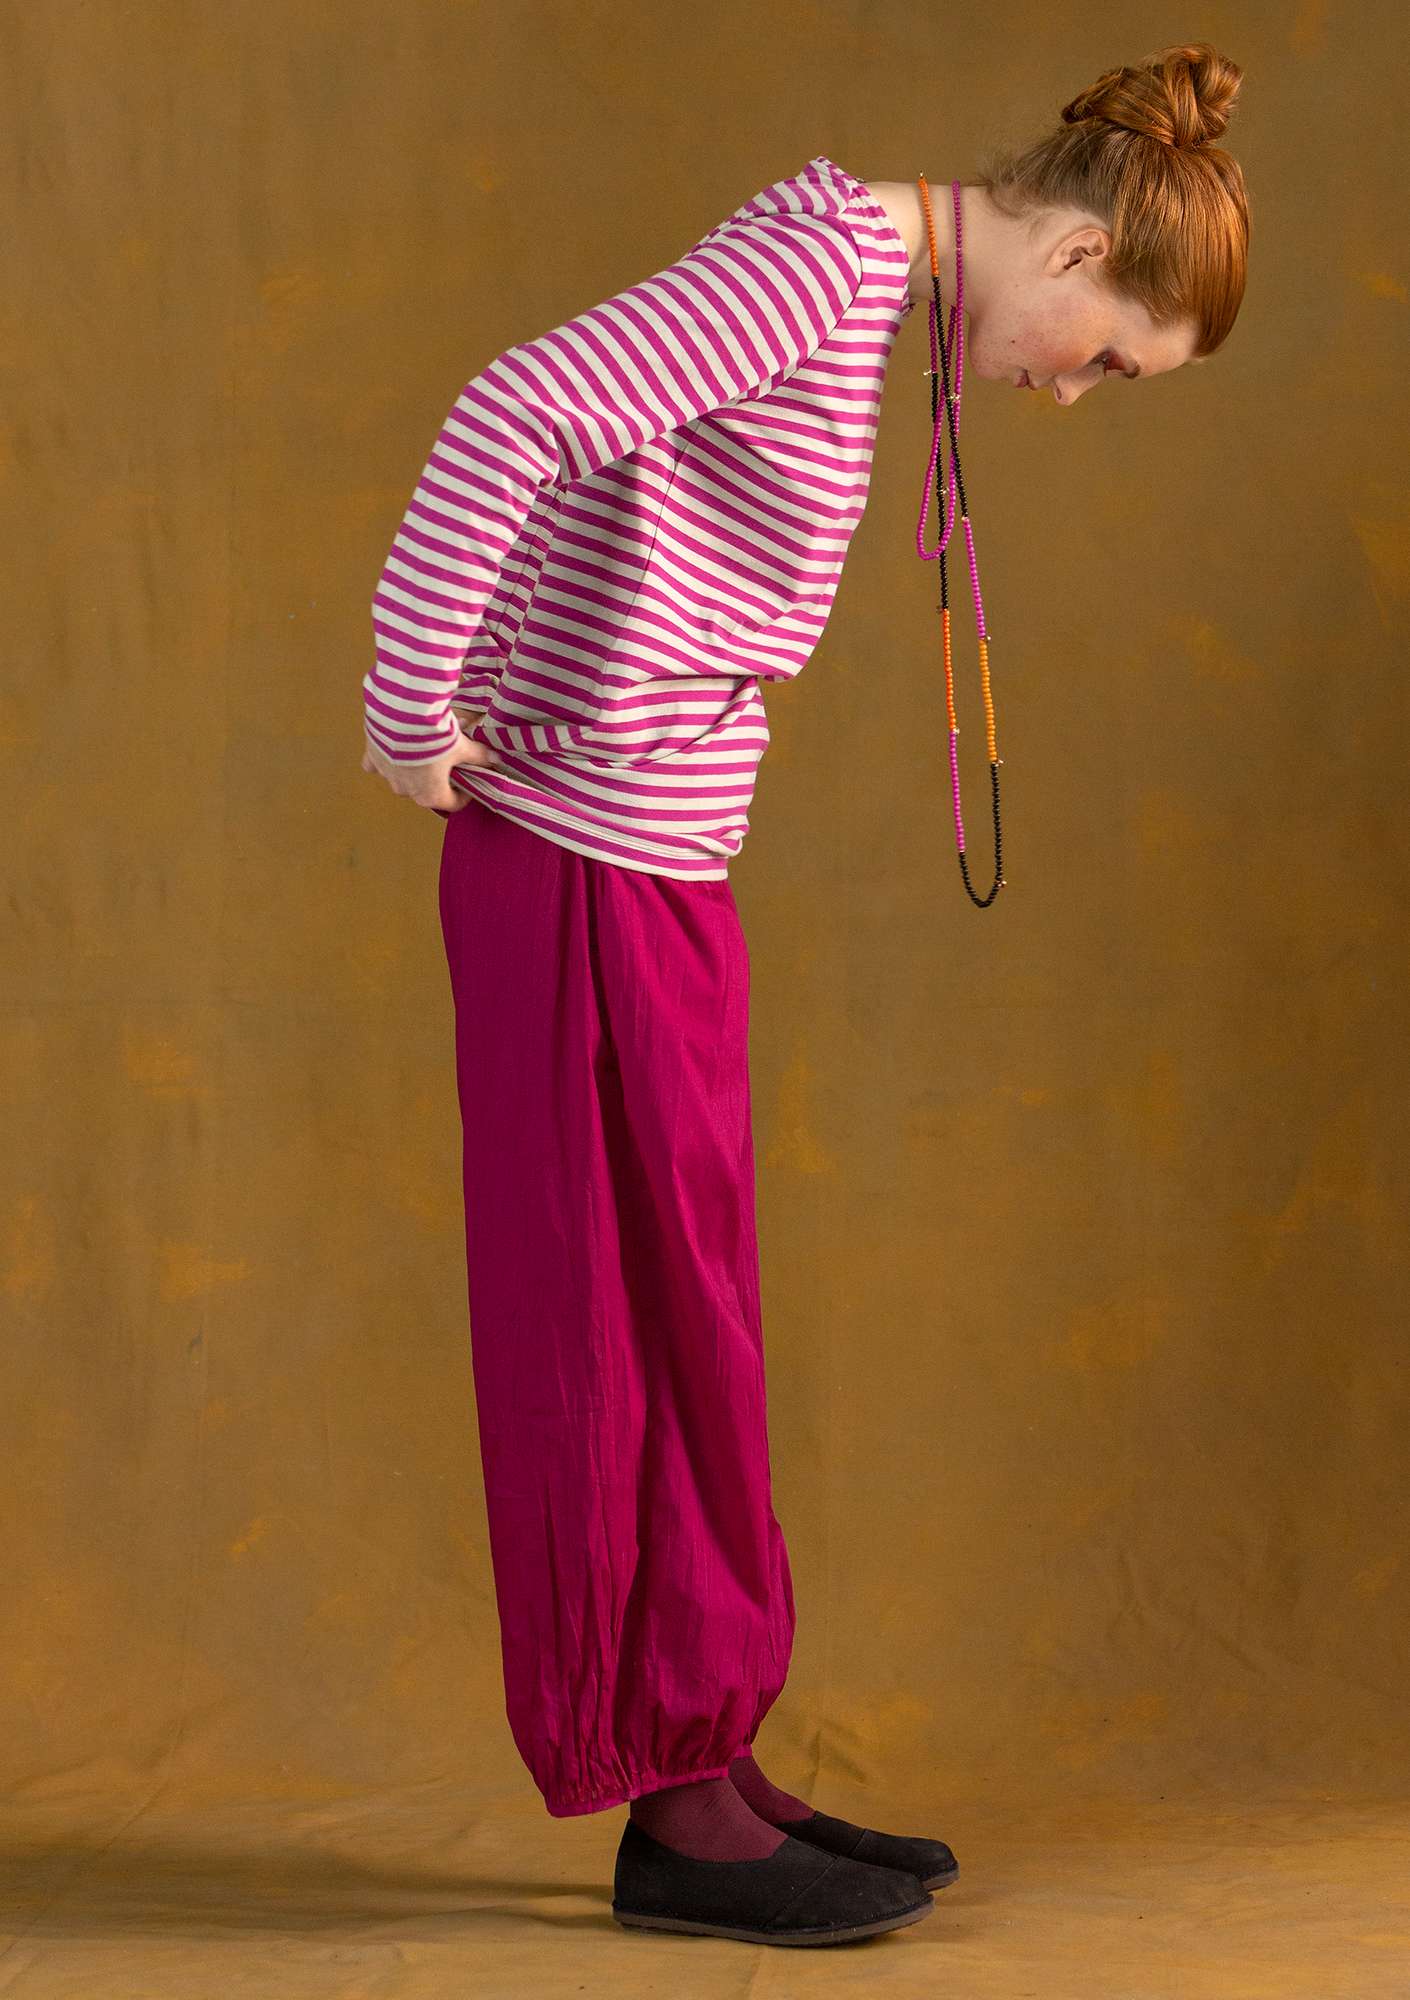 “Fruits” trousers in woven organic/recycled cotton grape